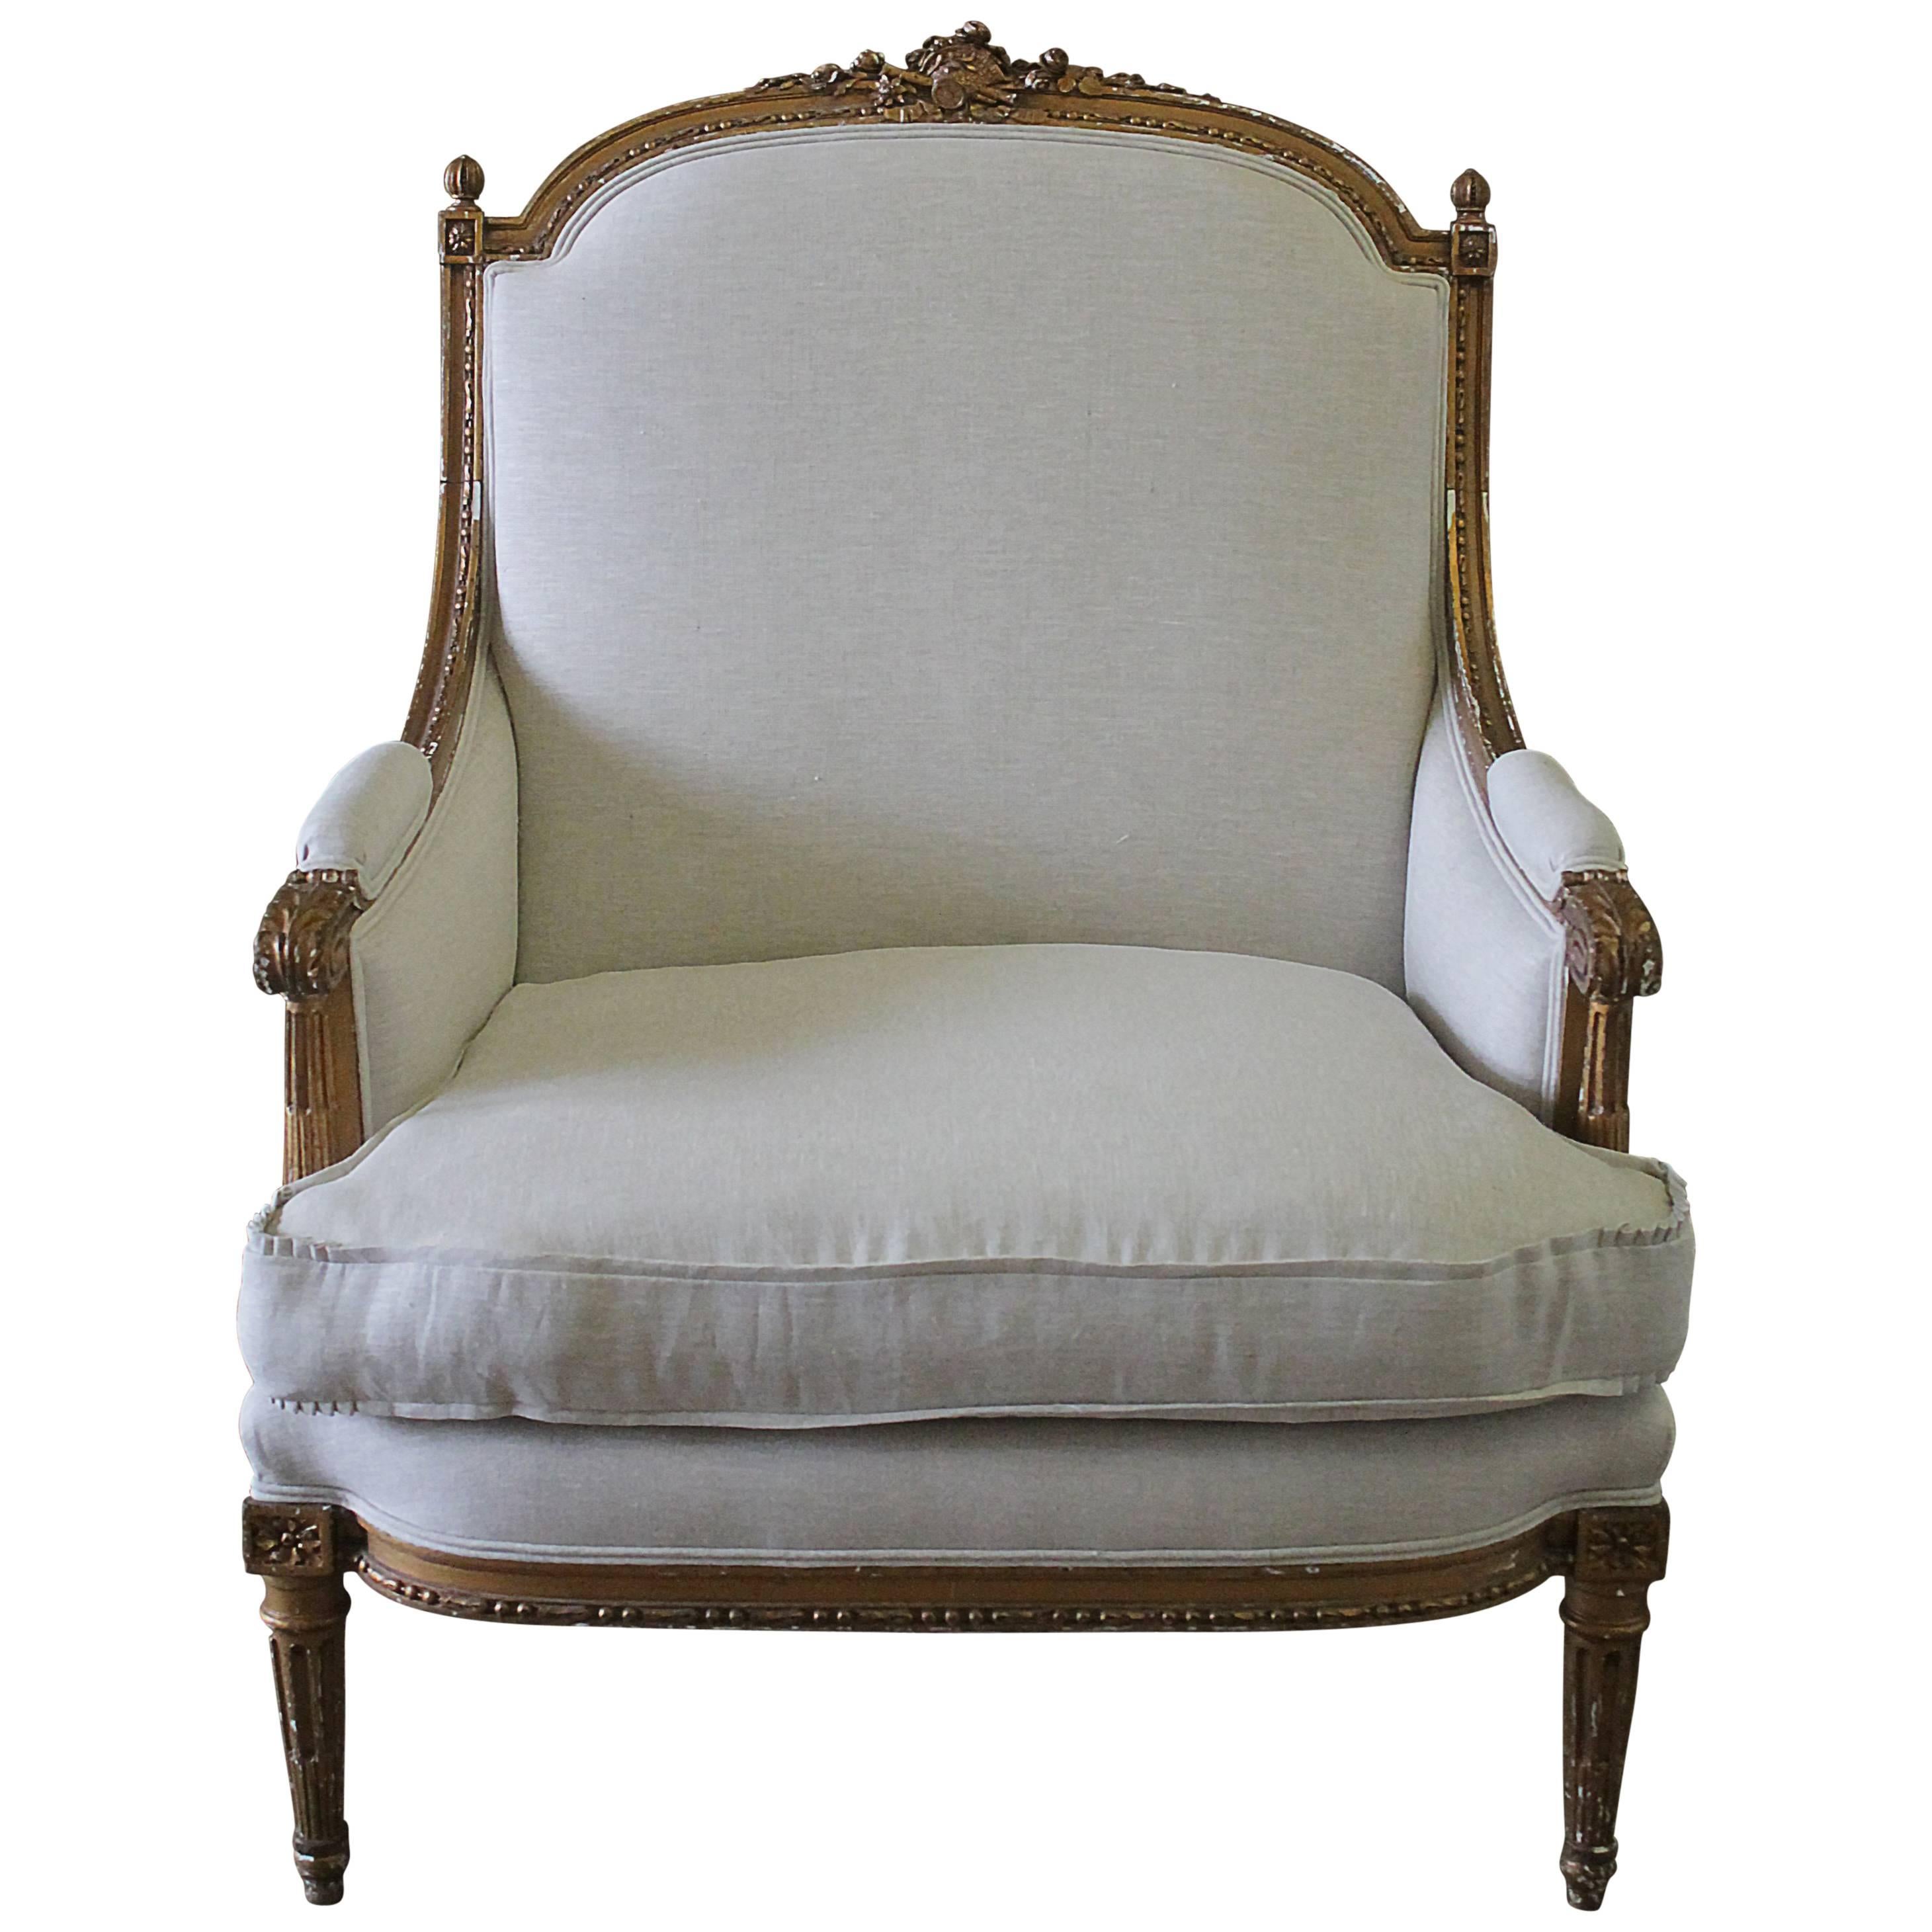 19th Century Antique Giltwood Louis XVI Style Bergere Chair Upholstered in Linen